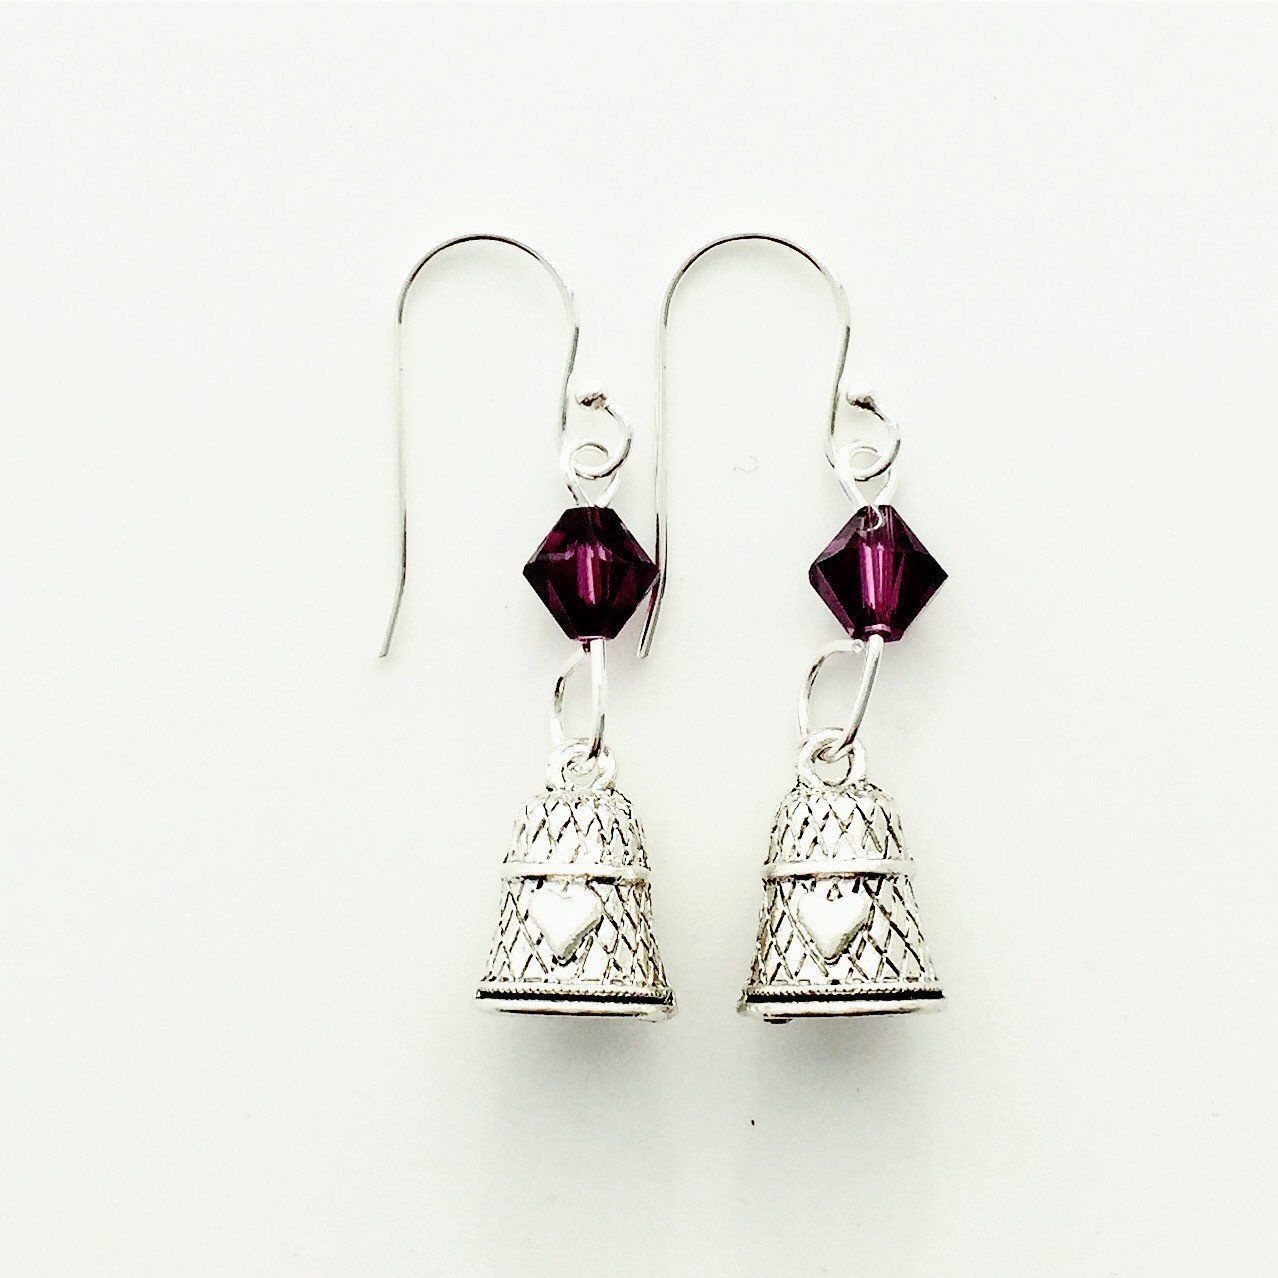 Thimble Silver Earrings with Purple Swarovski Crystals